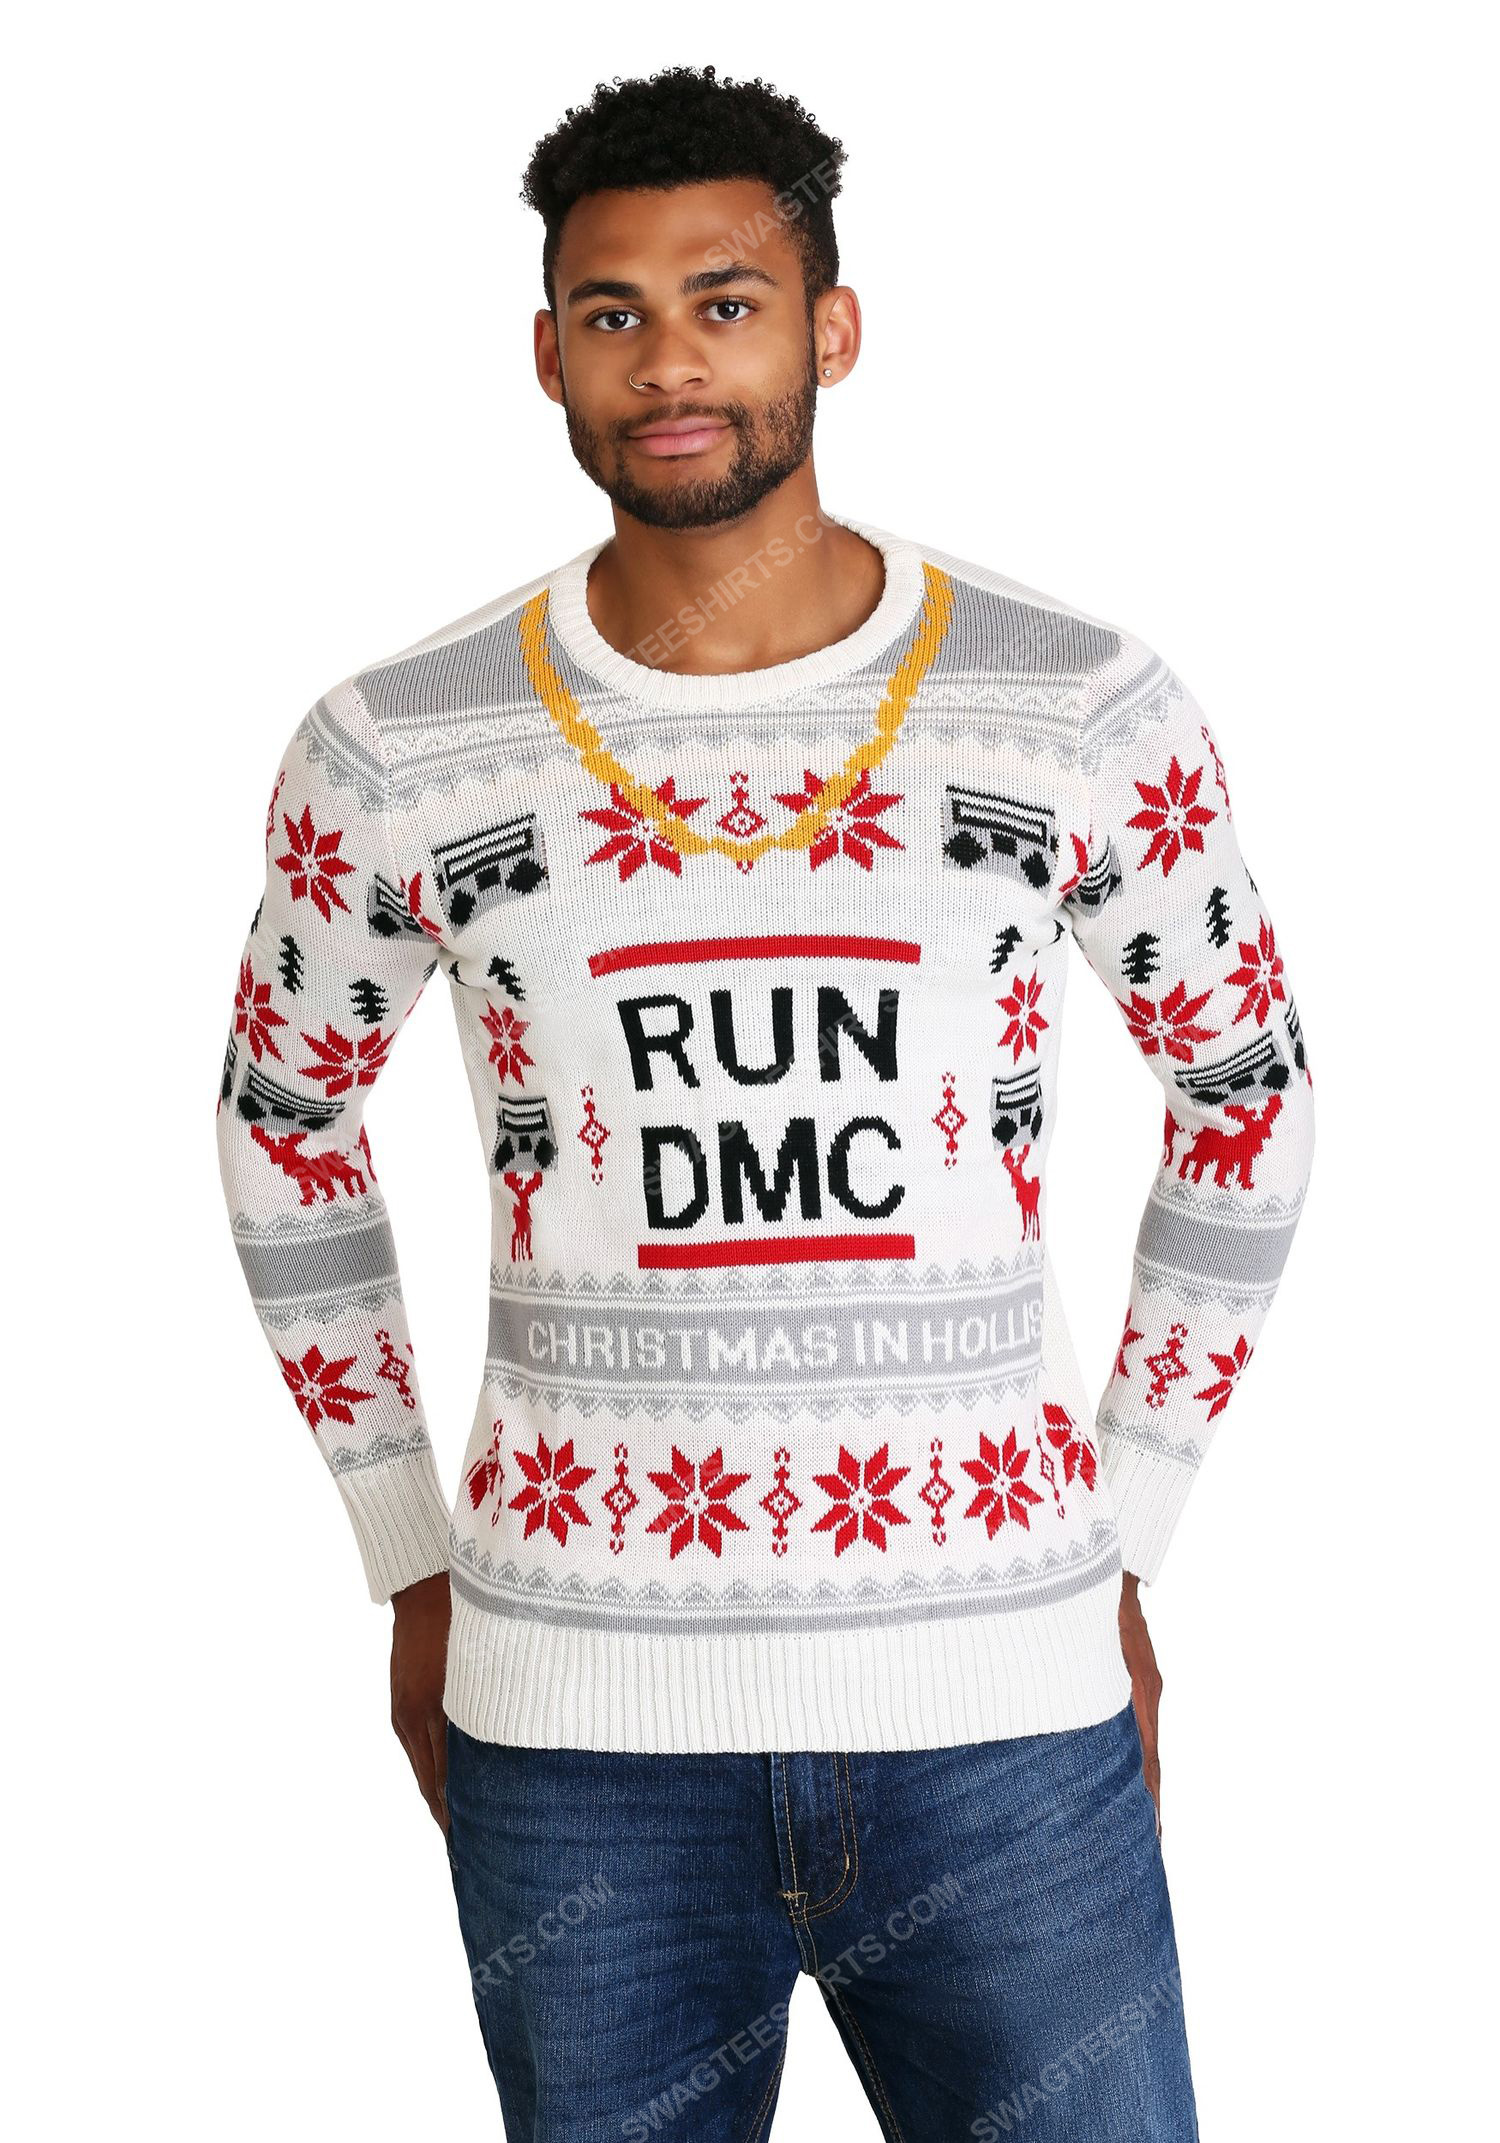 [special edition] Christmas holiday the run dmc chain full print ugly christmas sweater – maria